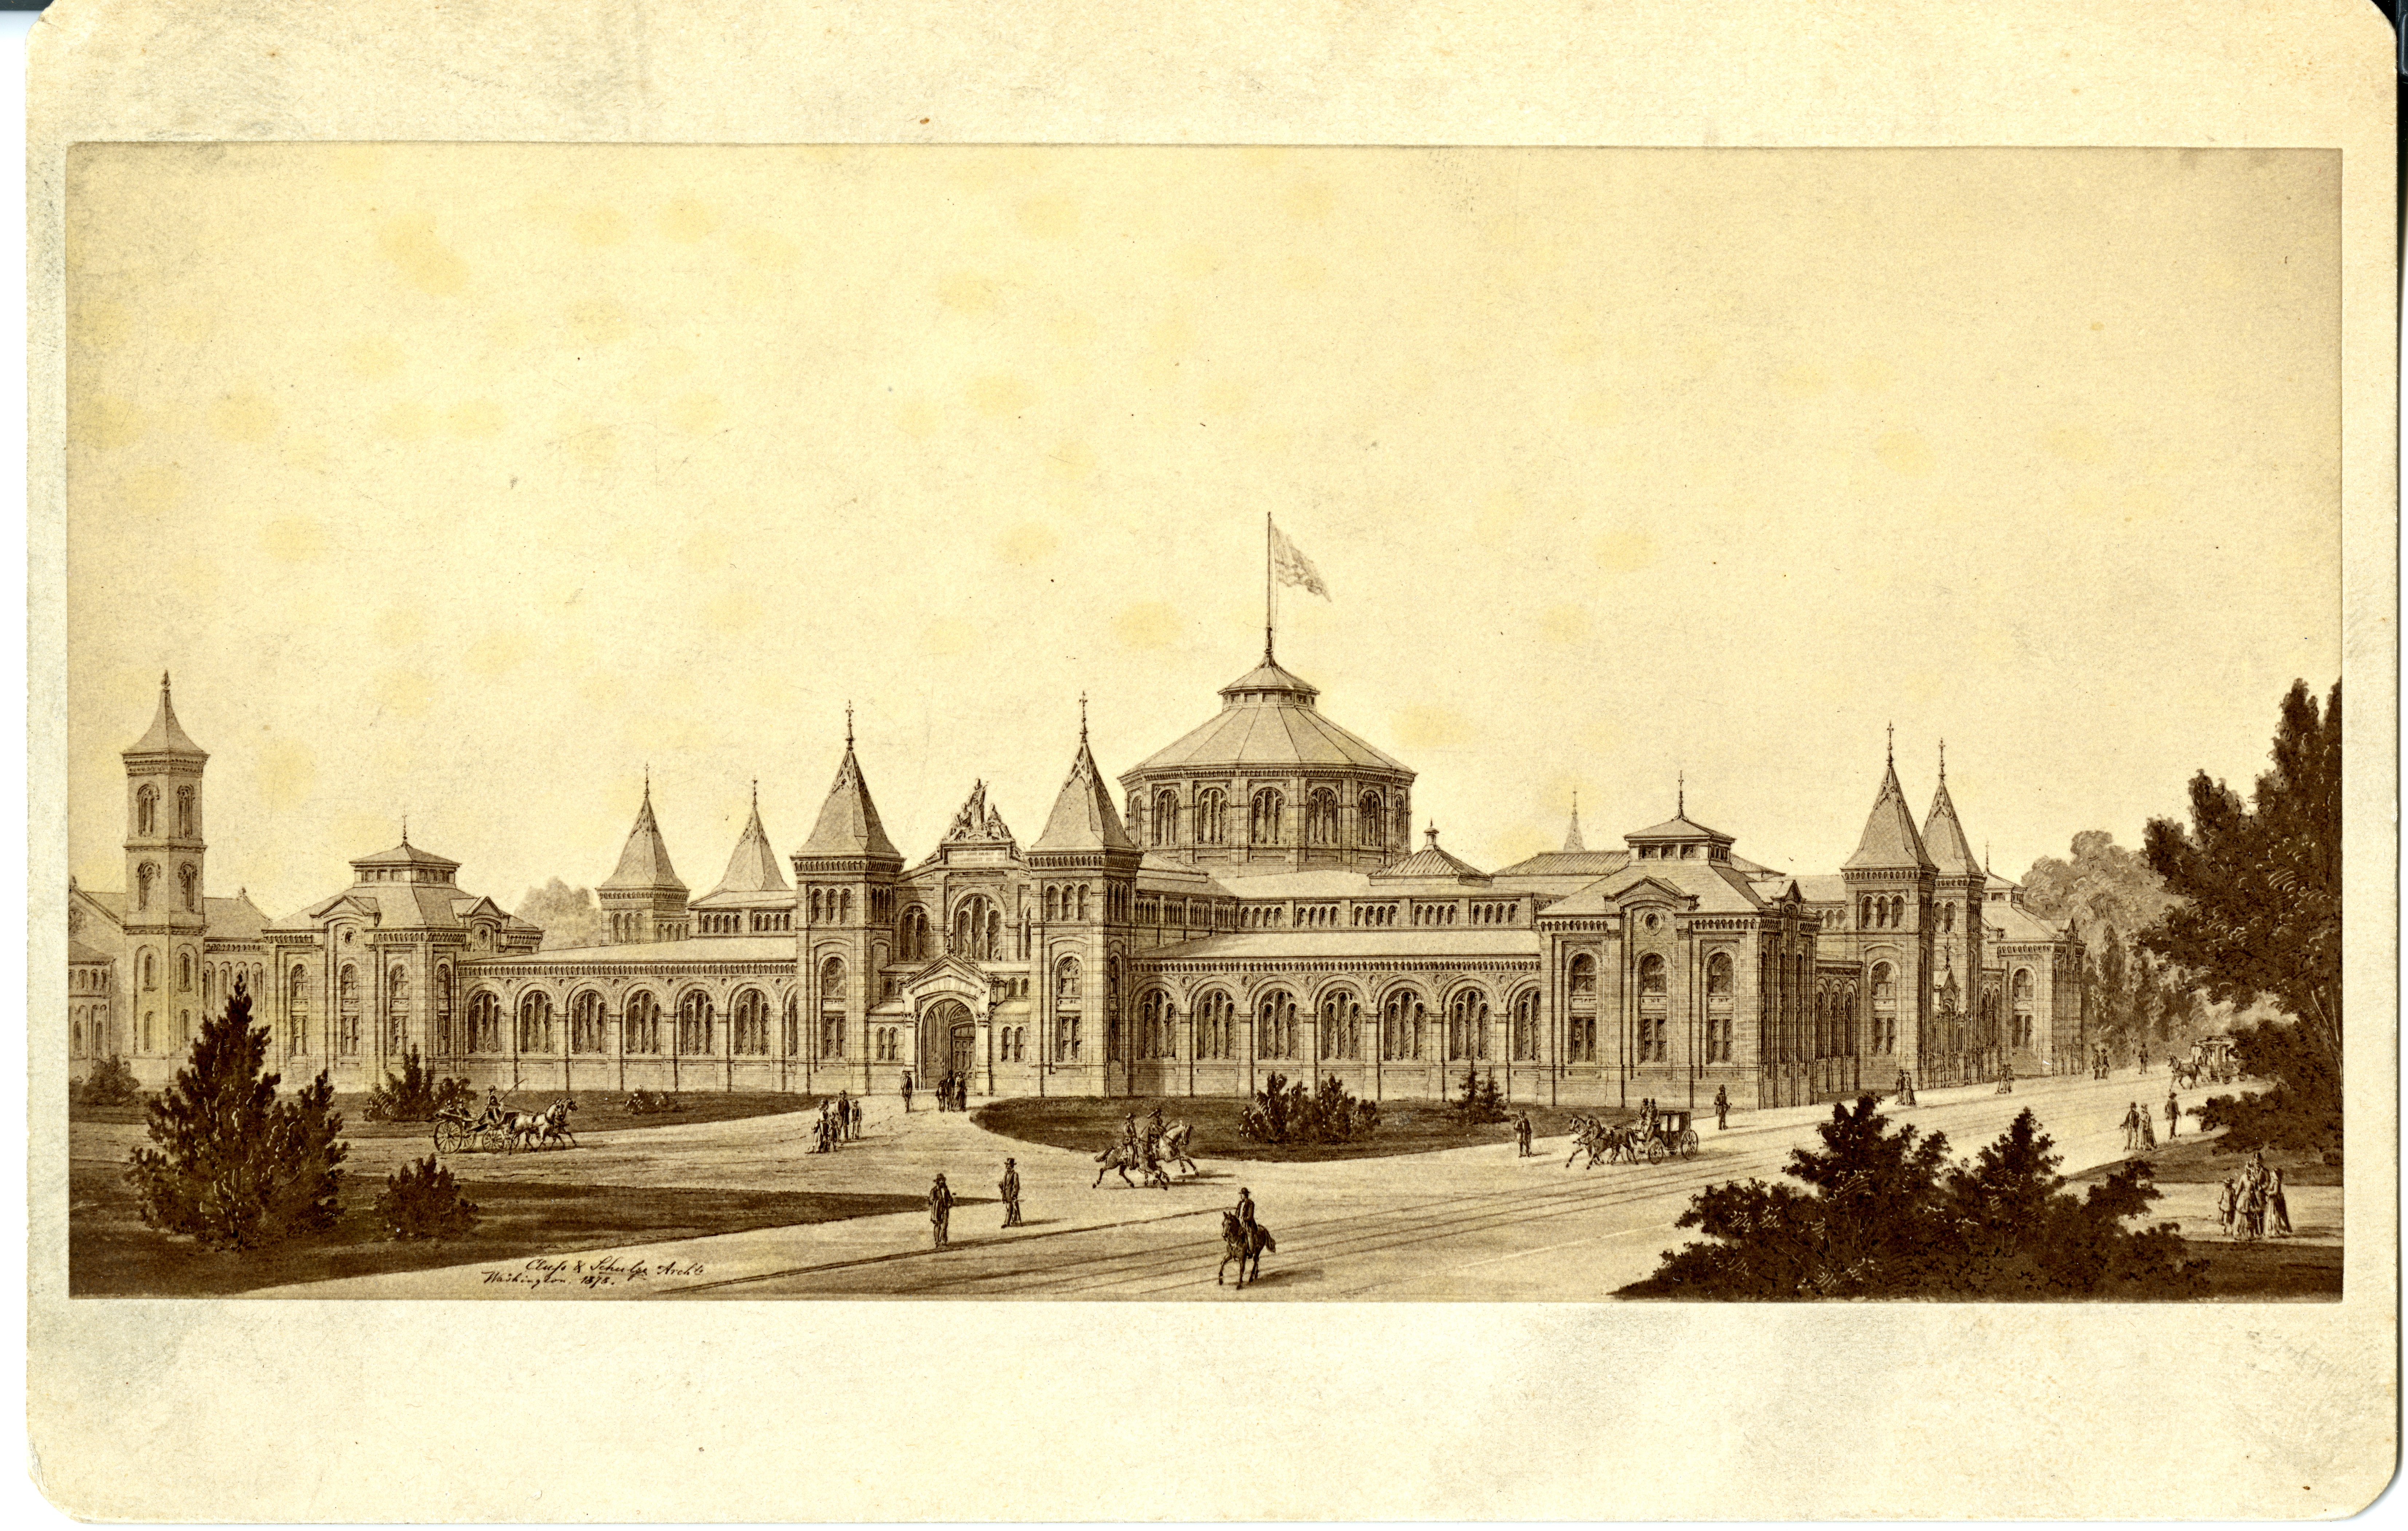 Rendering of the new United States National Museum, now the Arts and Industries Building, designed by Adolph Cluss and Rudolph Schulze. Record Unit 95, Smithsonian Institution Archives, Neg. no. SIA2011-1079.